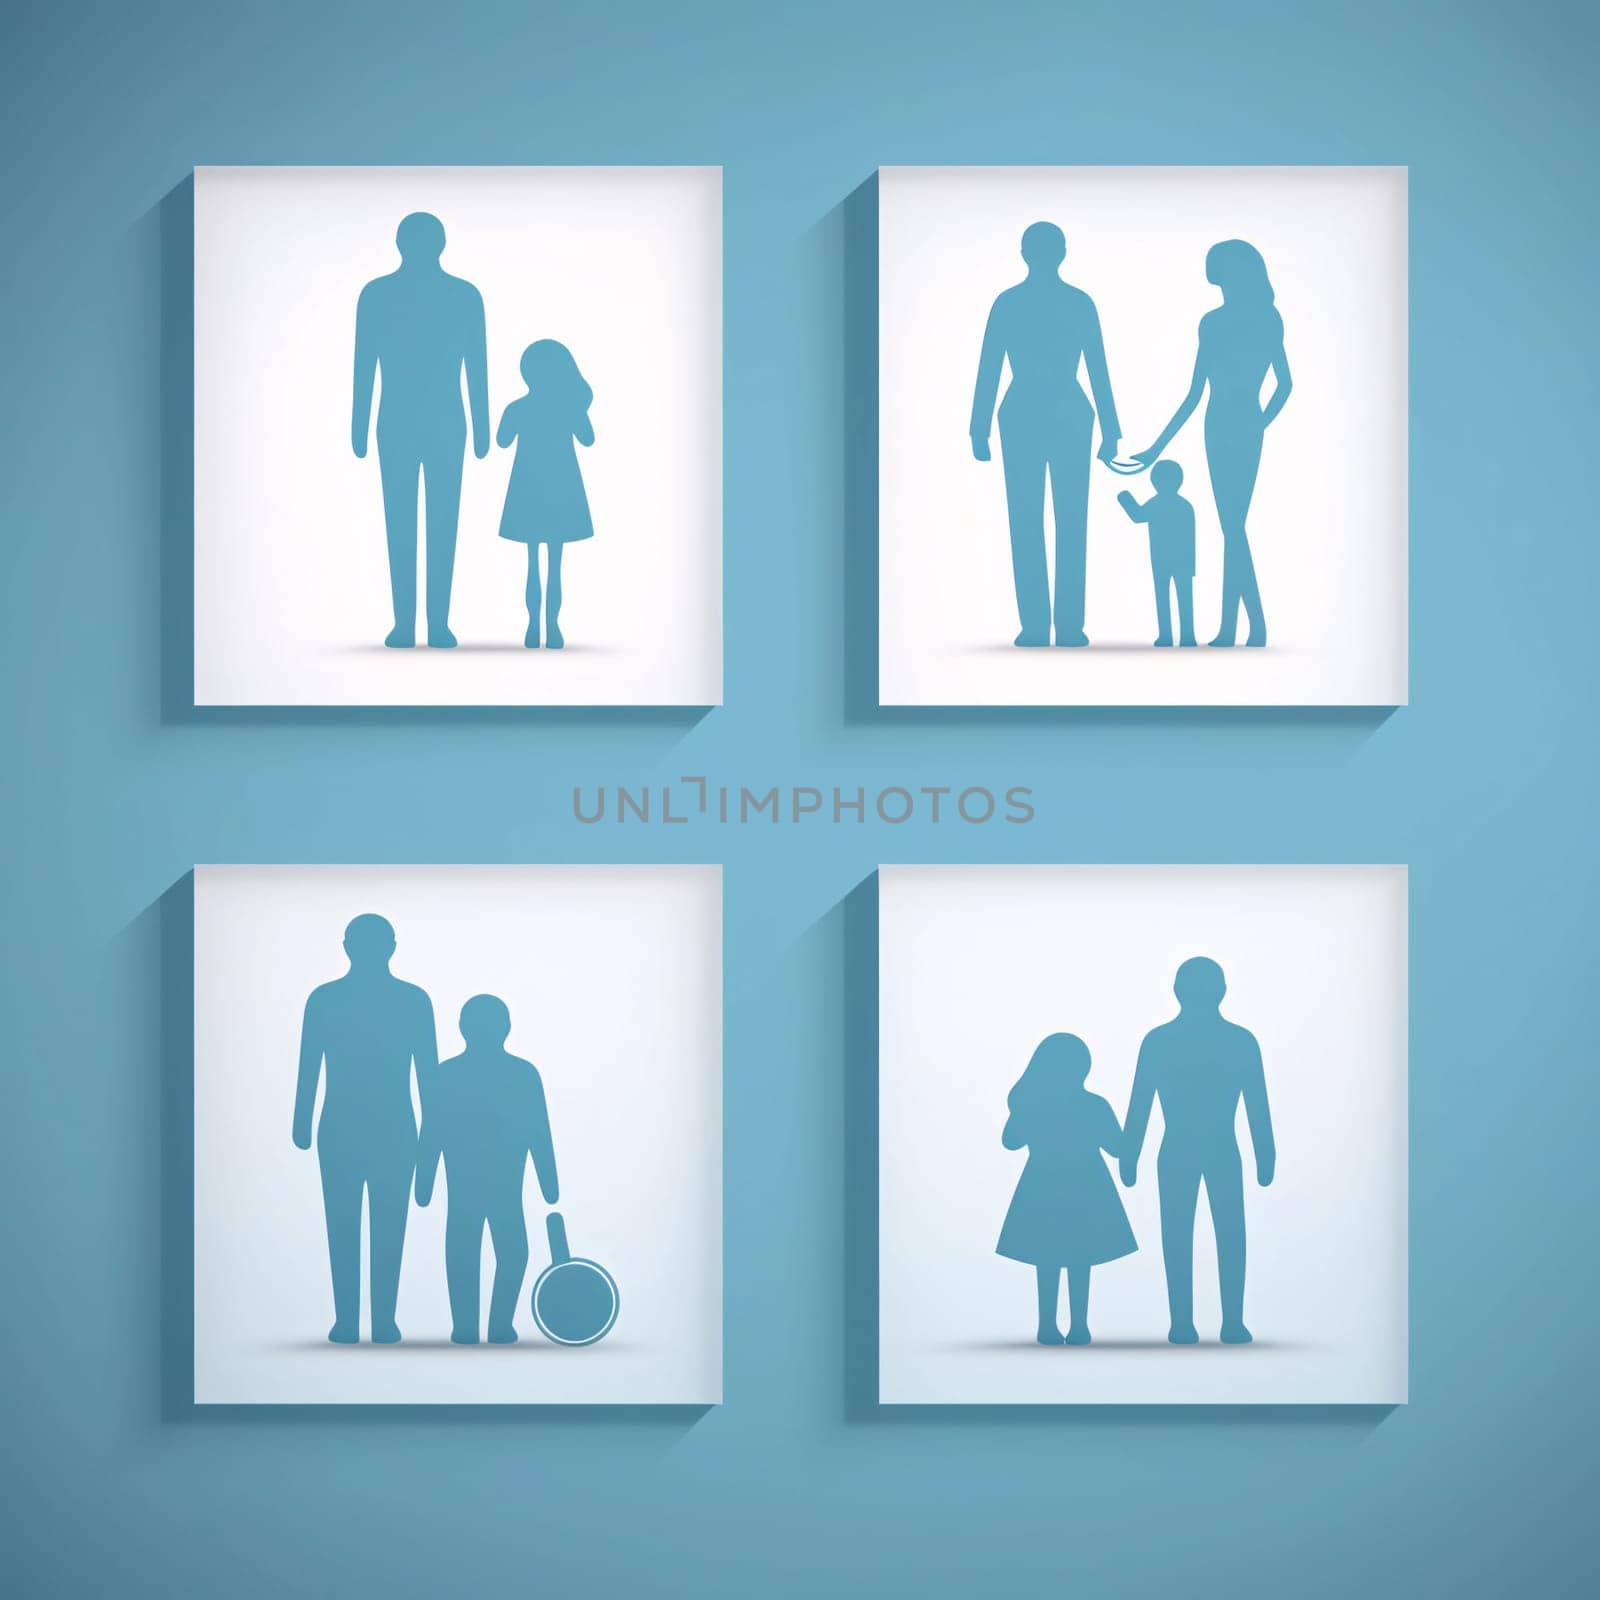 New icons collection: Family icons set. Vector illustration. Eps 10. Blue background.